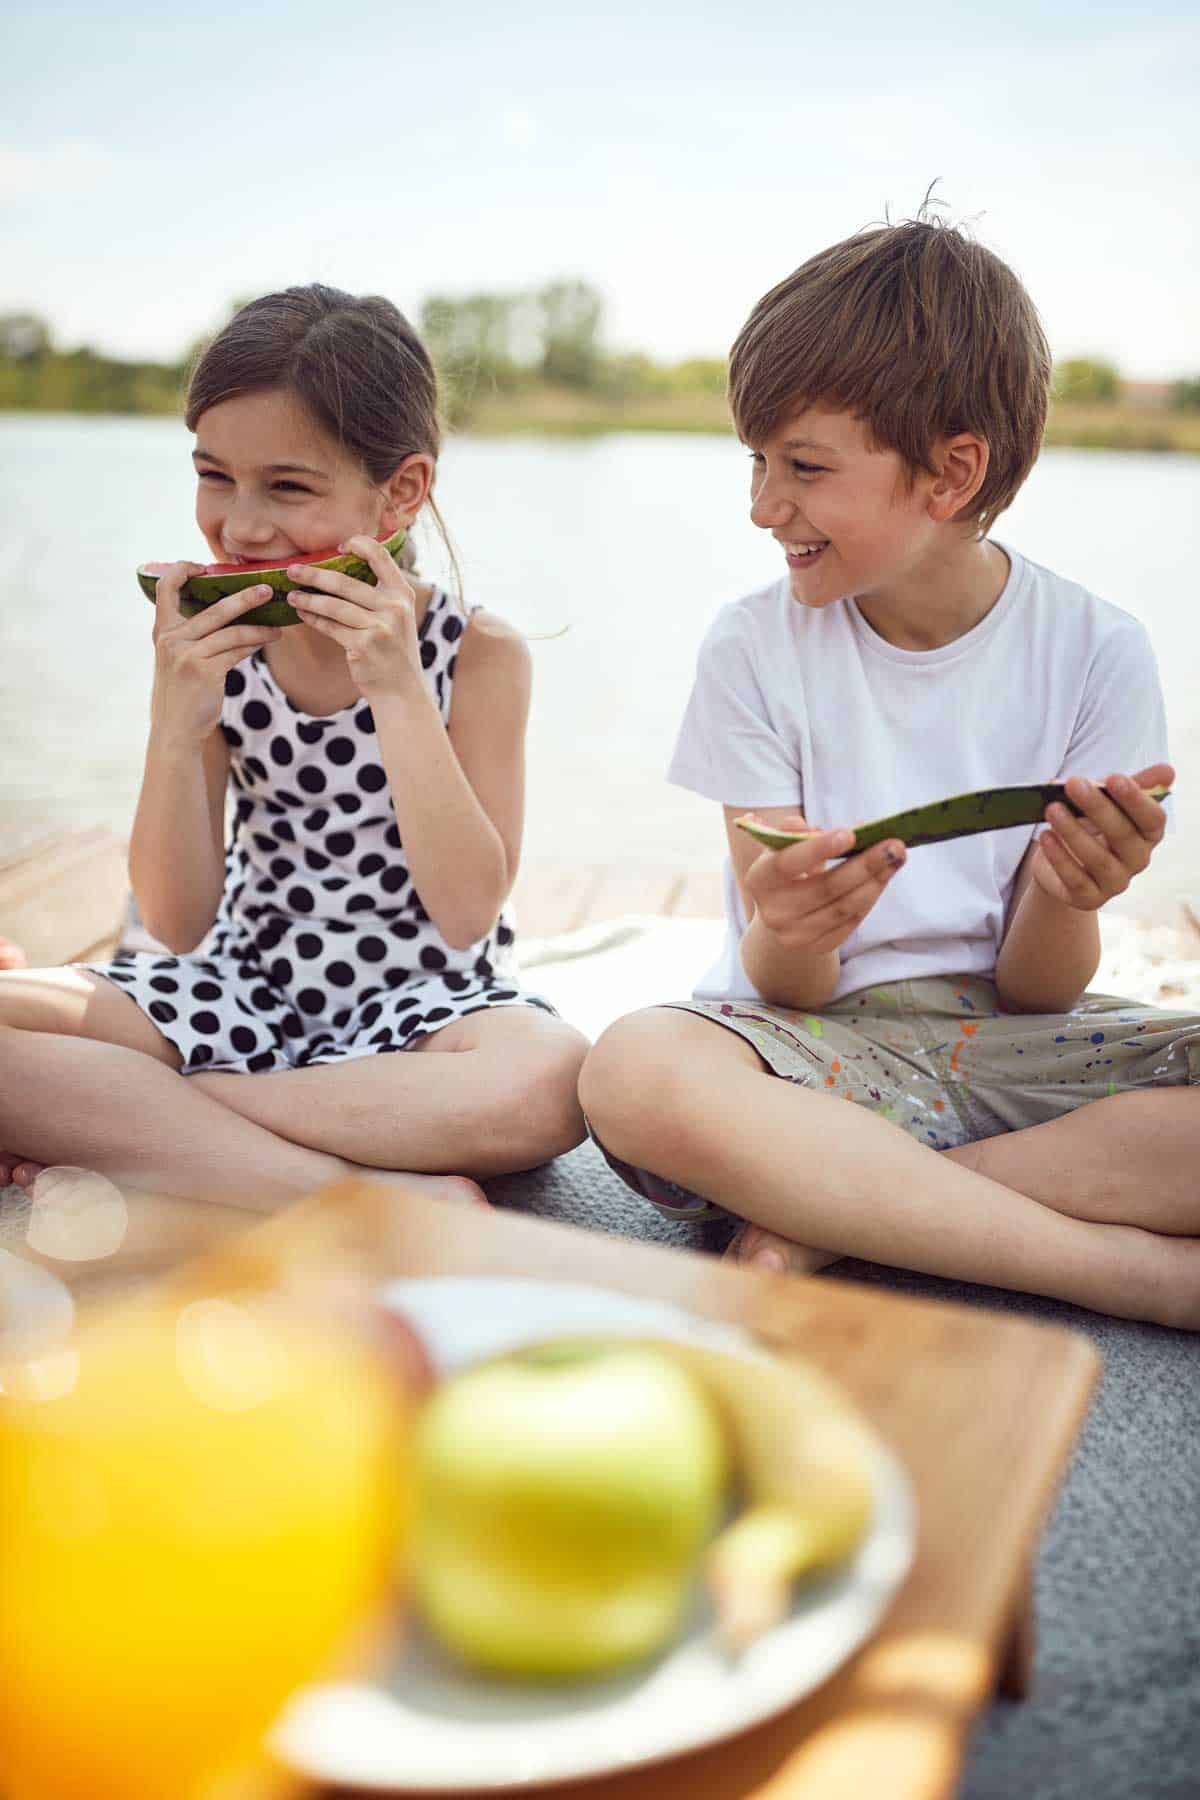 Two children sitting on the ground eating fruit at a picnic.